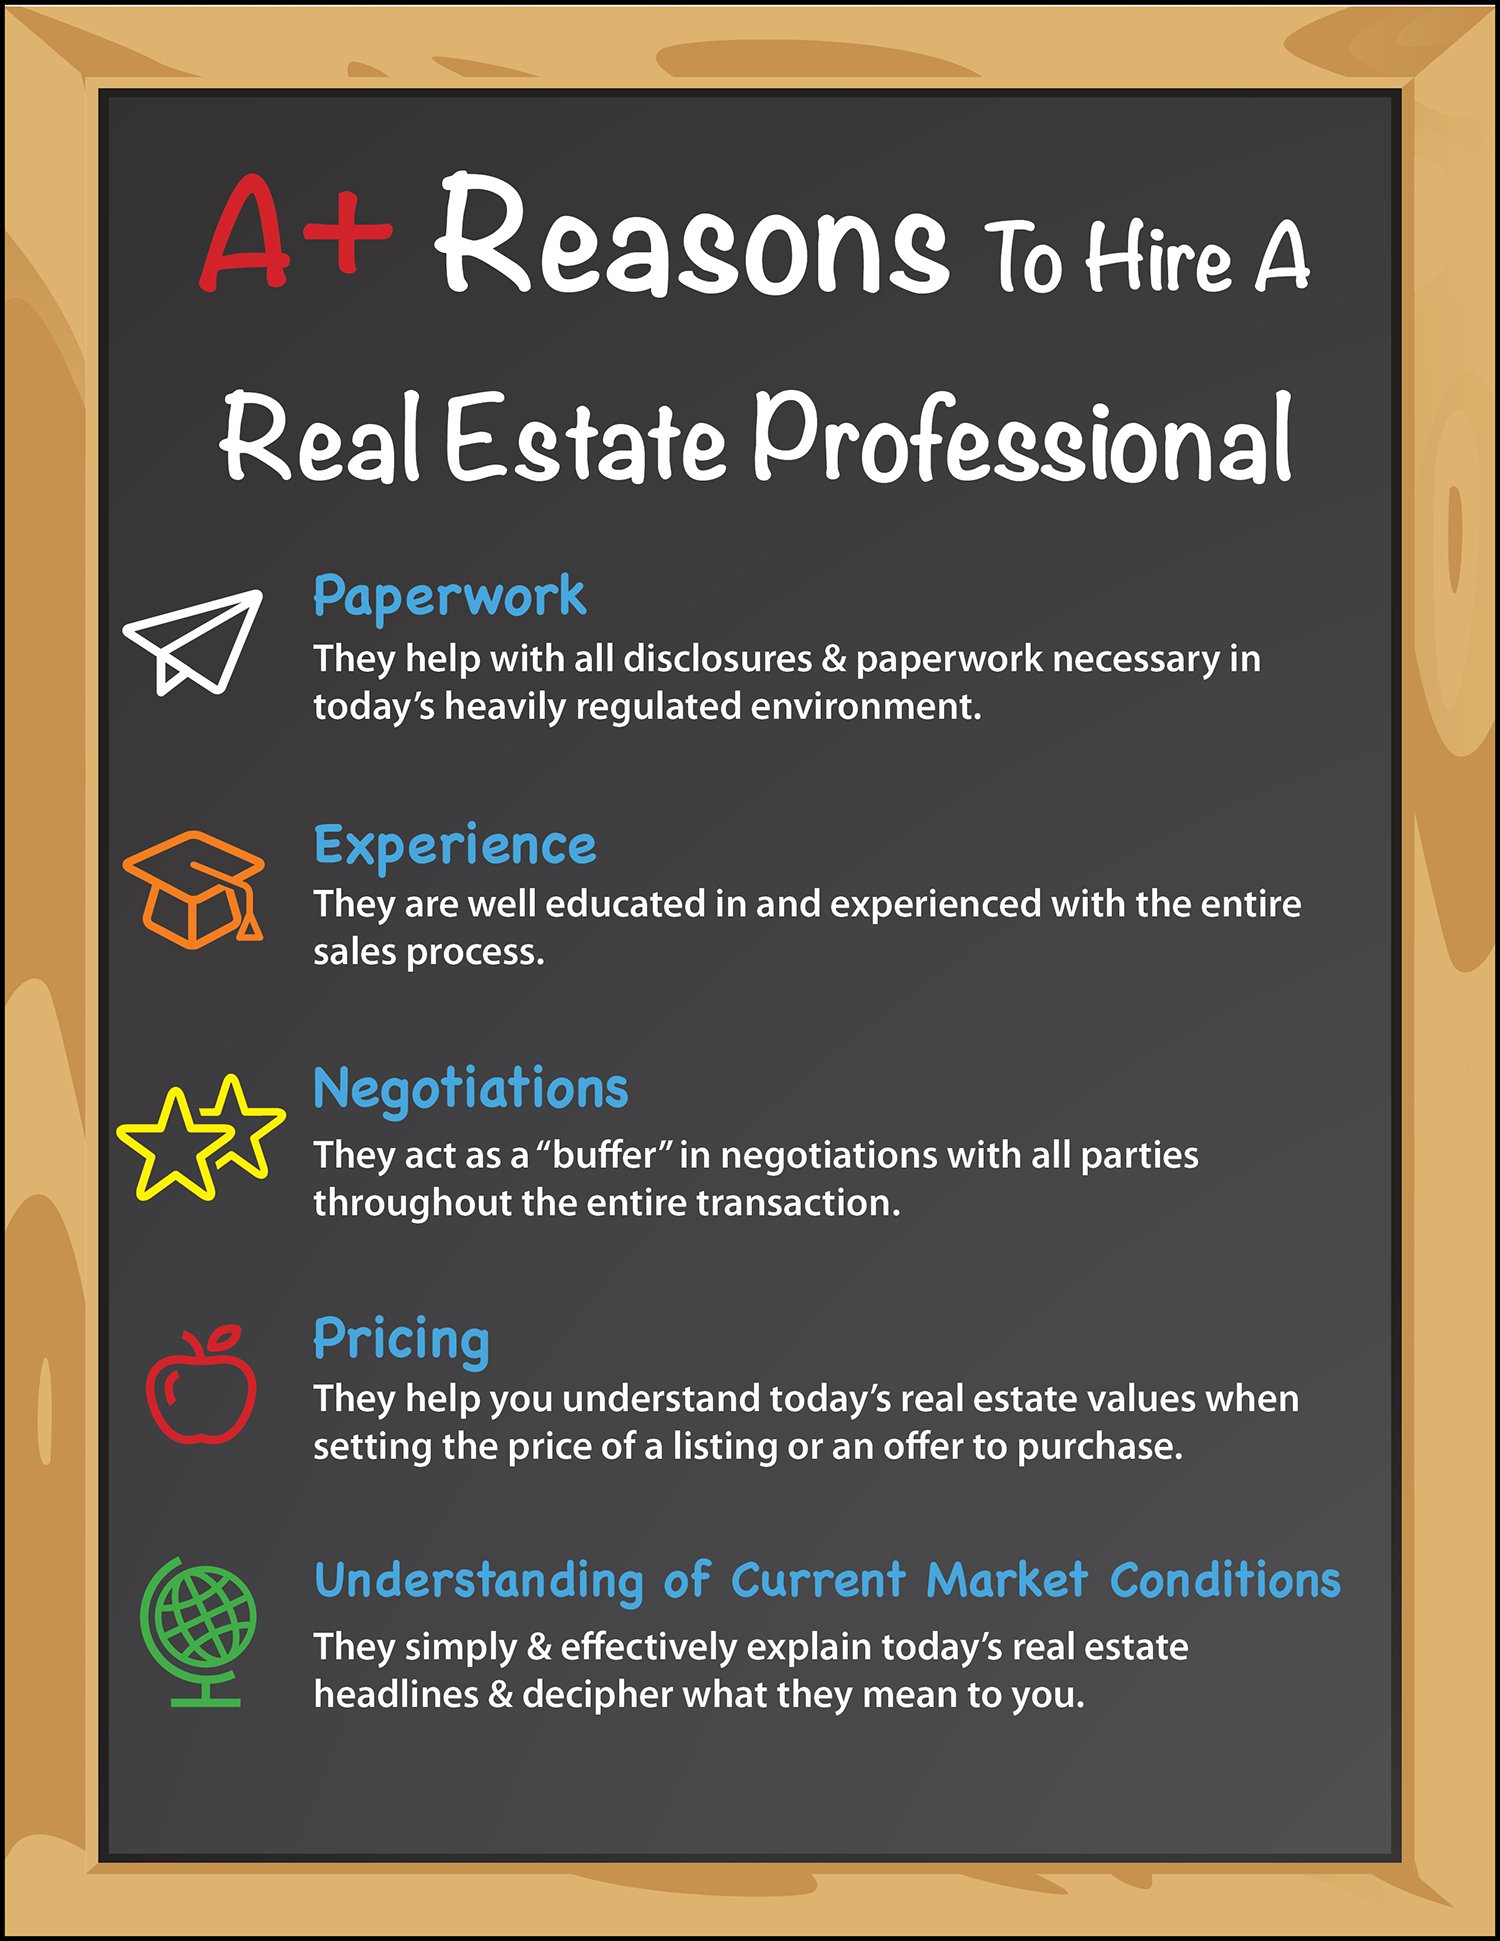 Want to Get an A? Hire A Real Estate Pro [INFOGRAPHIC] | Simplifying The Market